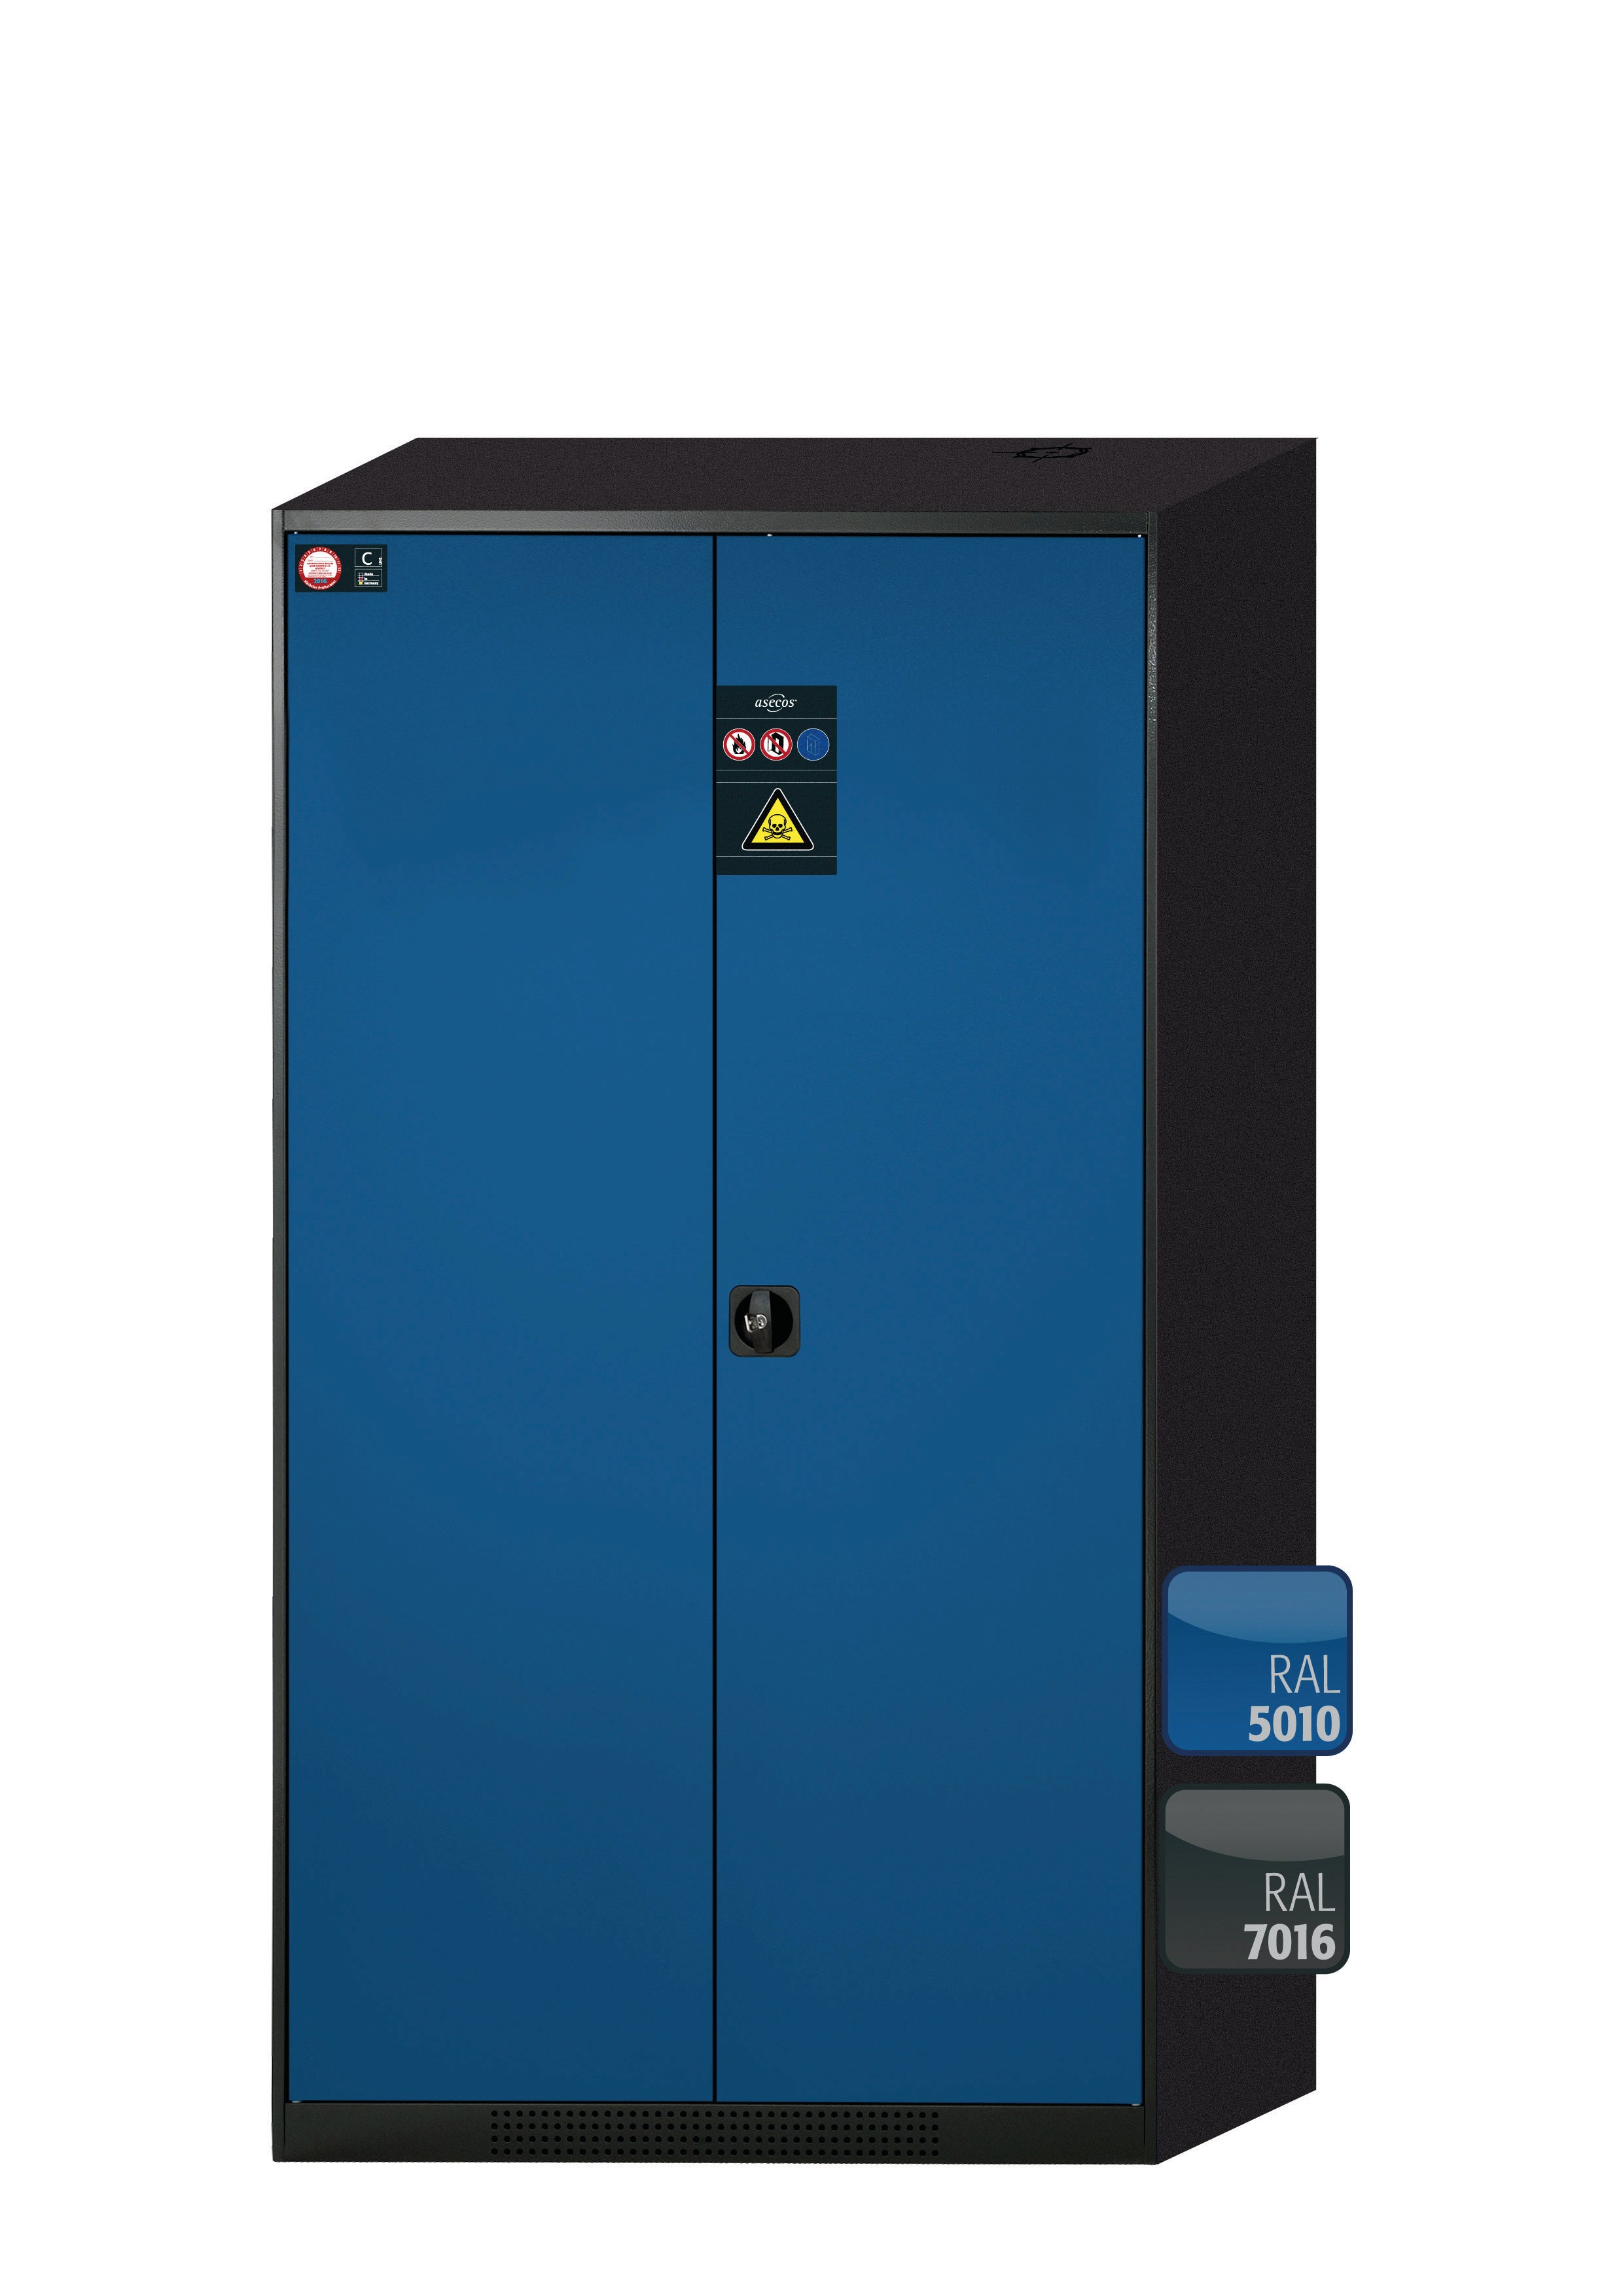 Chemical cabinet CS-CLASSIC model CS.195.105 in gentian blue RAL 5010 with 3x standard shelves (sheet steel)